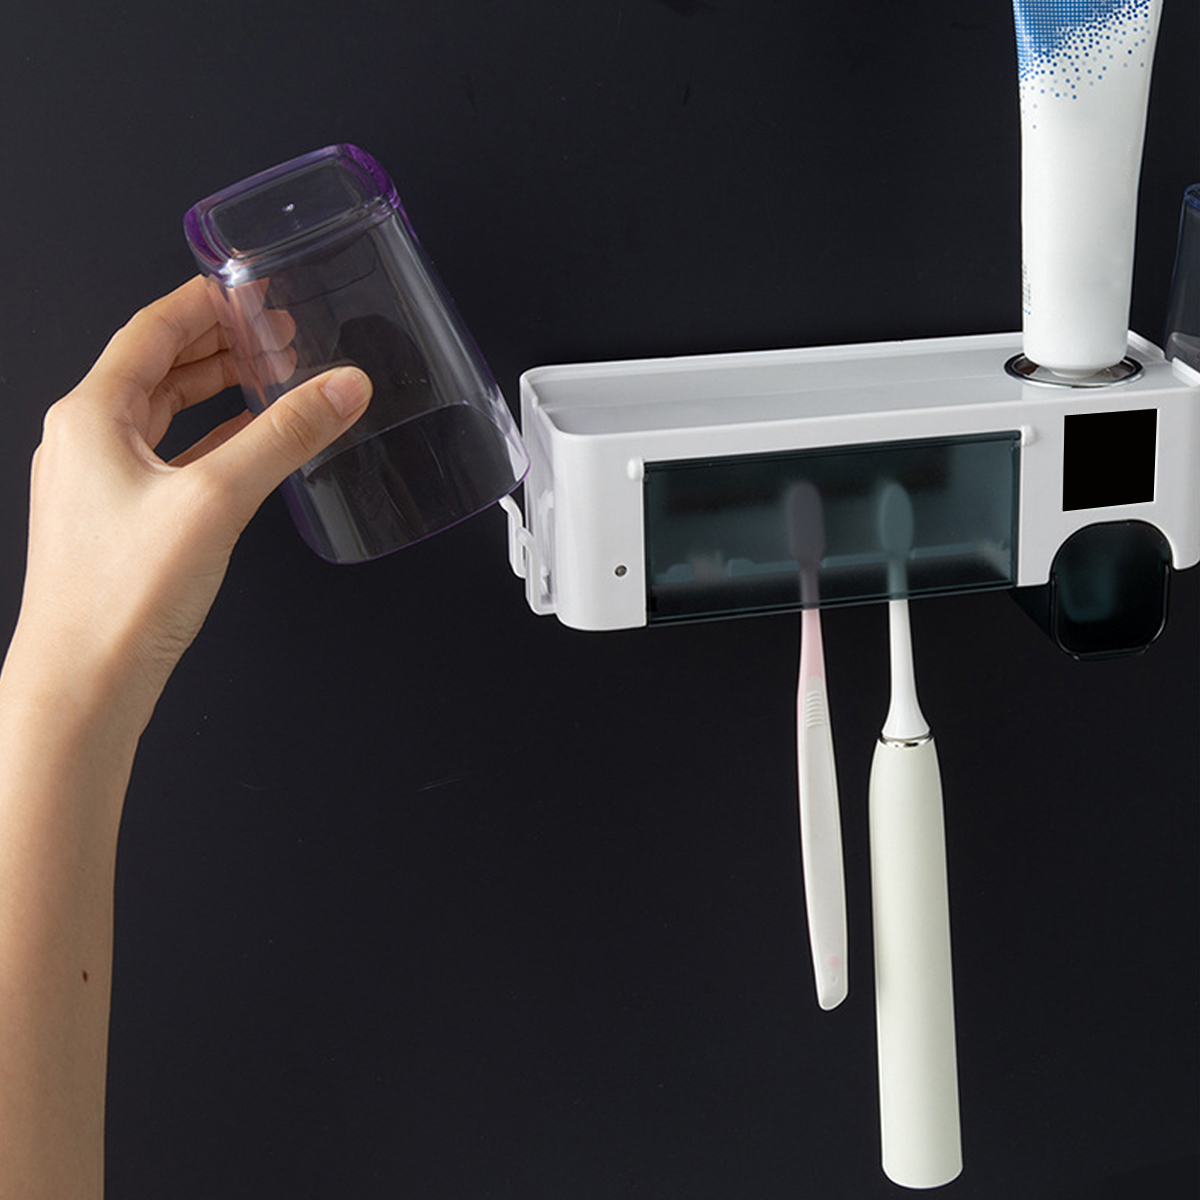 Ultraviolet-Electric-Toothbrush-Sterilizer-Wall-Mount-Toothbrush-Storage-Holder-Automatic-Toothpaste-1681238-8